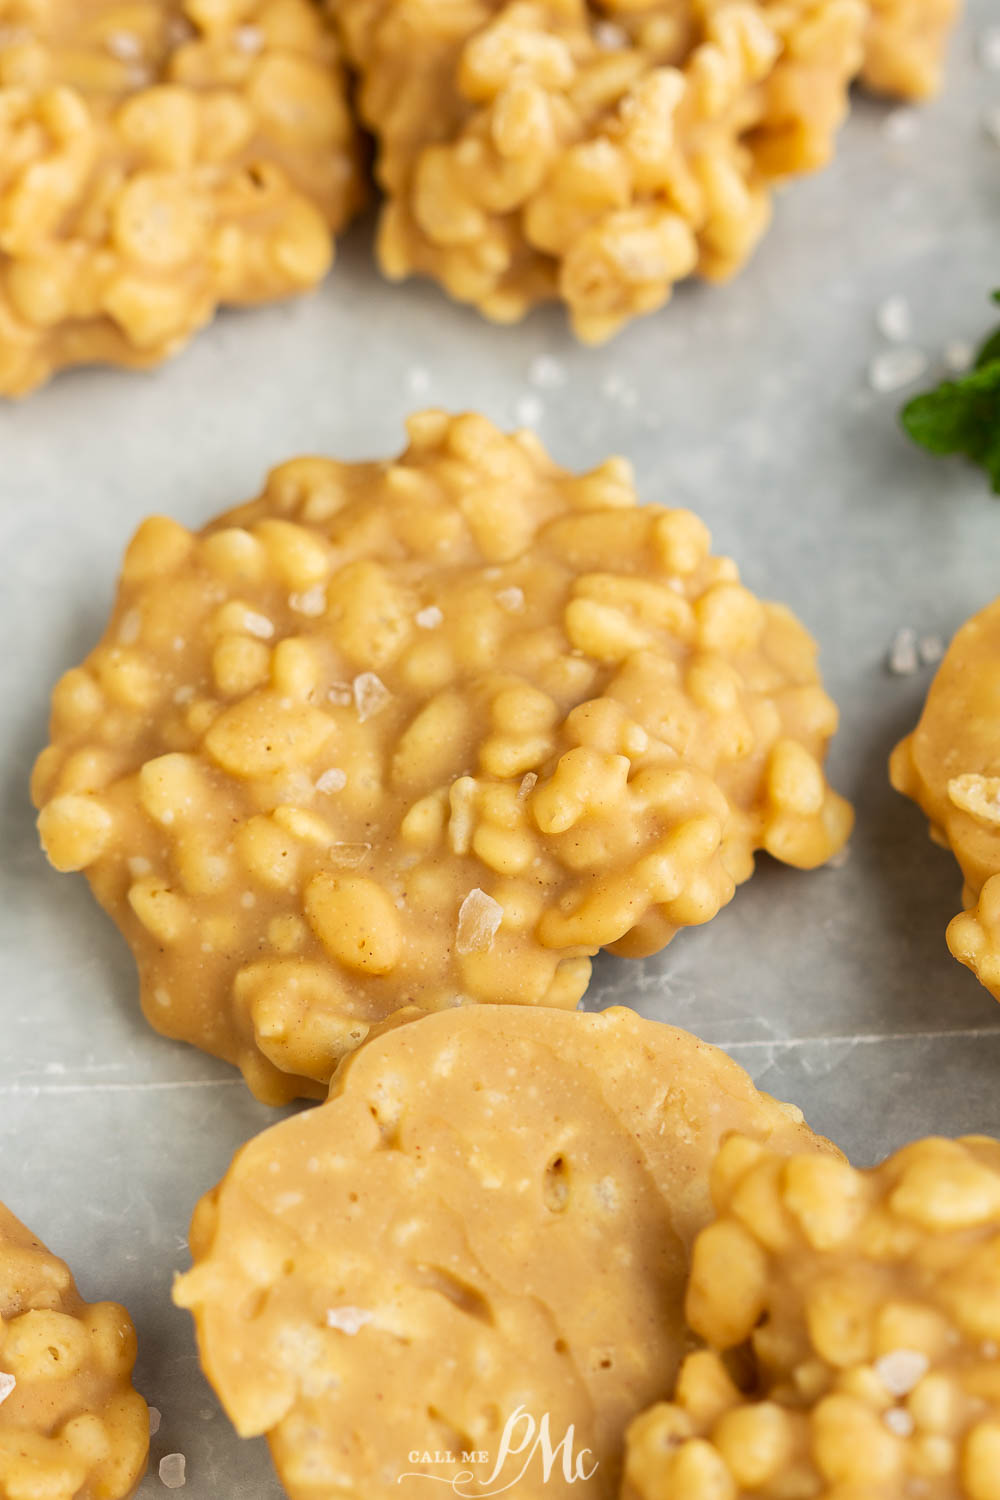 Easy, quick, and addicting, Peanut Butter Rice Krispie Cookies take one pan, 5 ingredients, and less than 15 minutes to make.